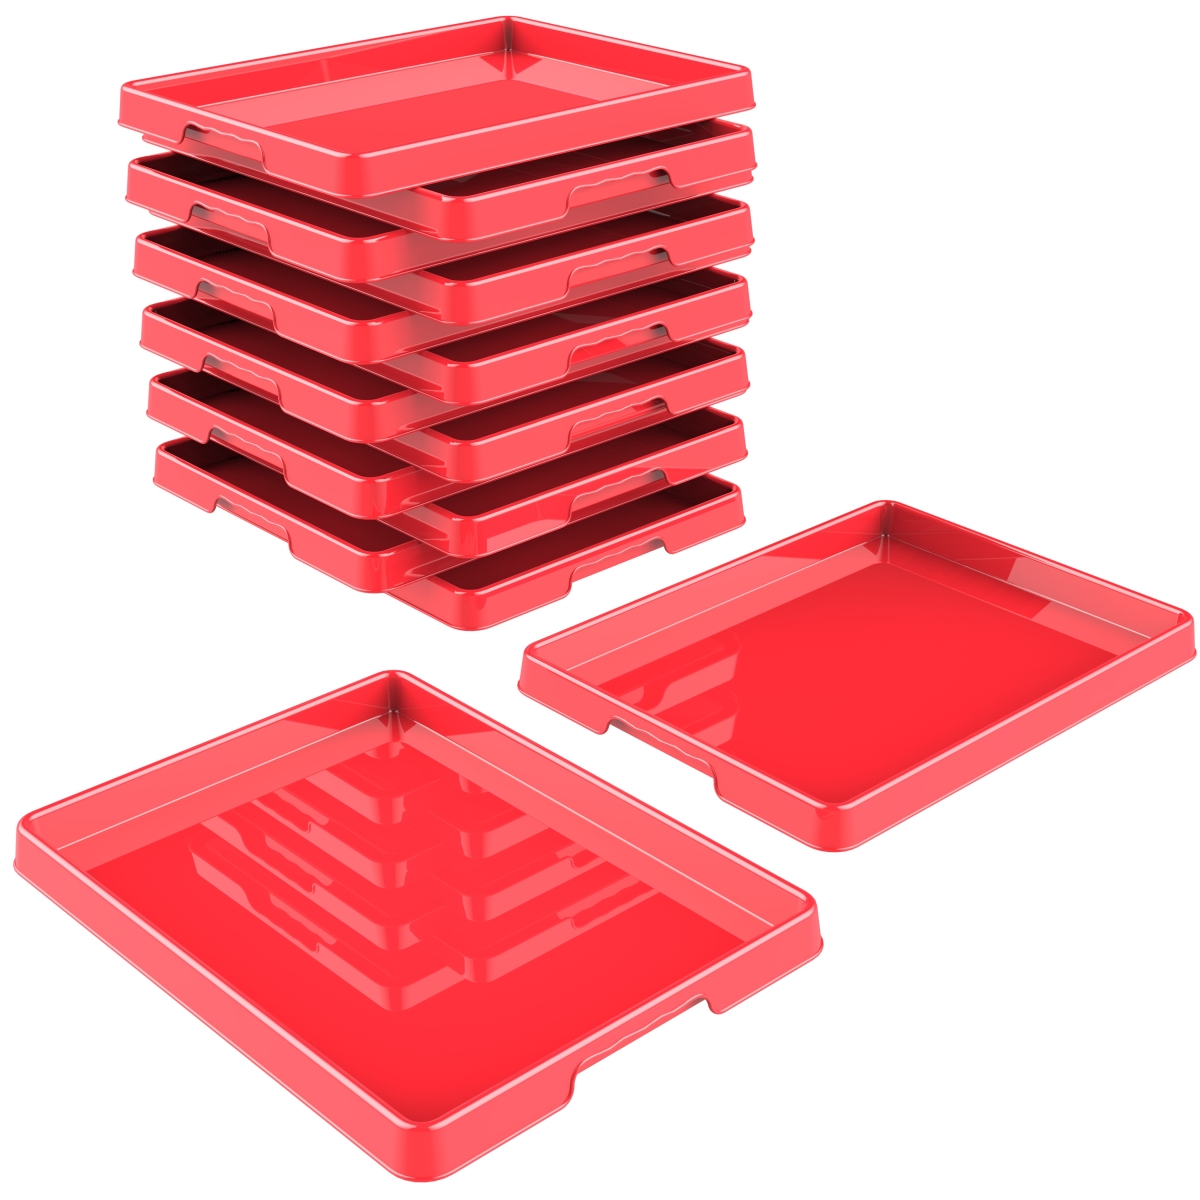 00442e12c 12 X 16 In. Sorting & Crafts Tray, Red - Pack Of 12